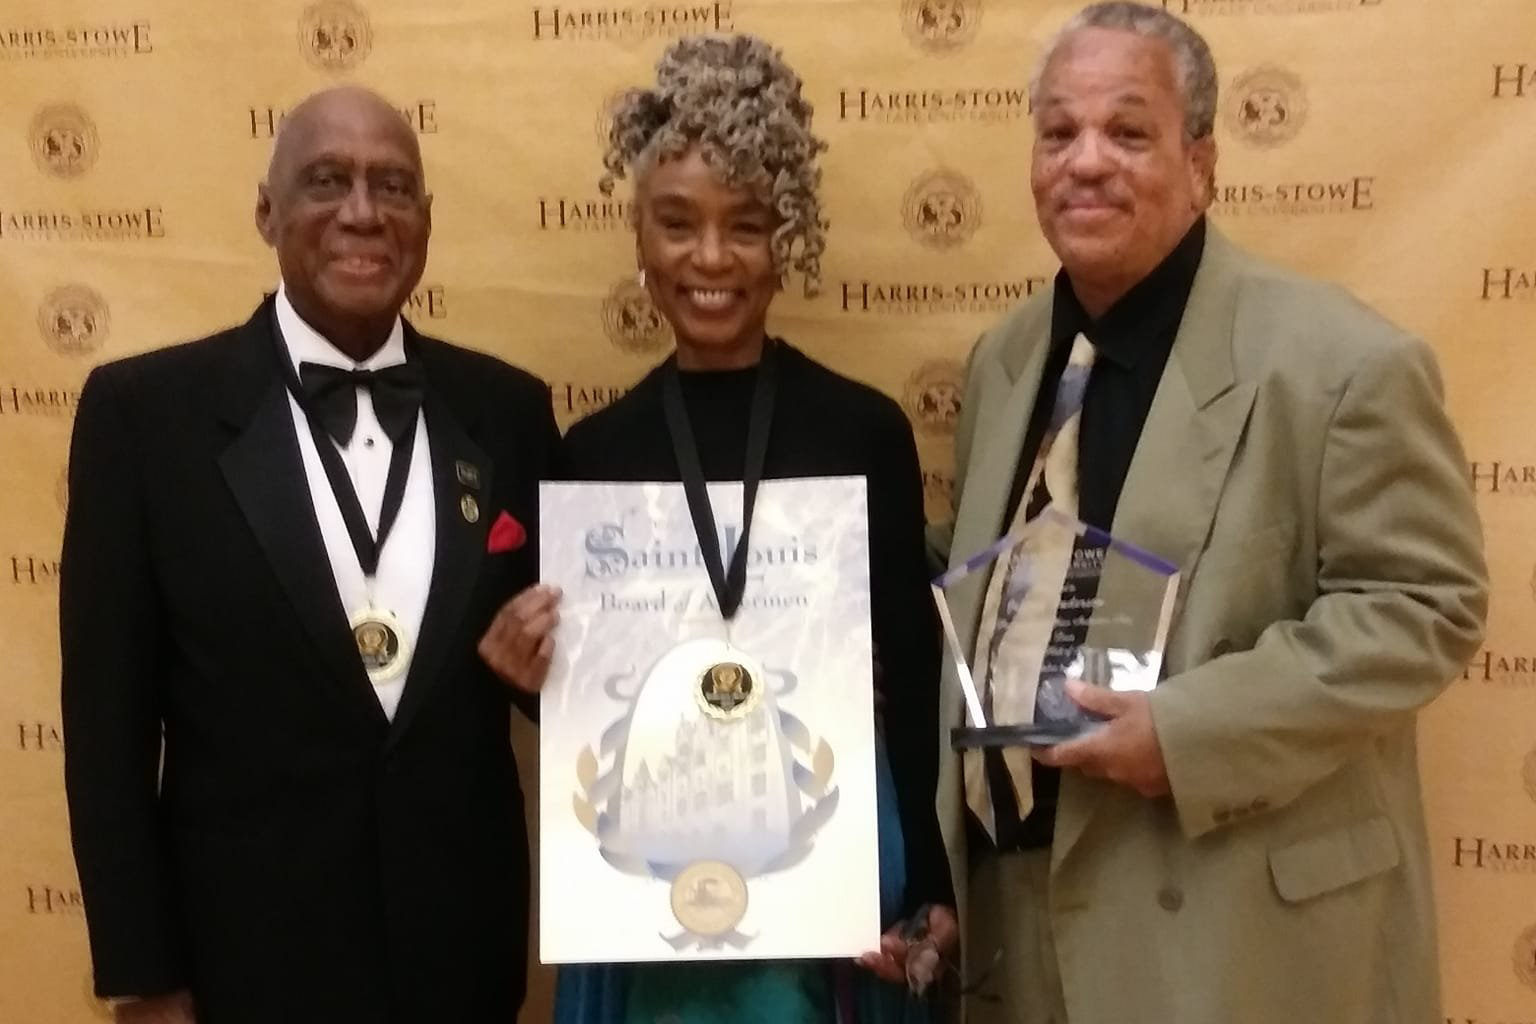 'Your Lady Edie B' inducted into the National Black Radio Hall of Fame